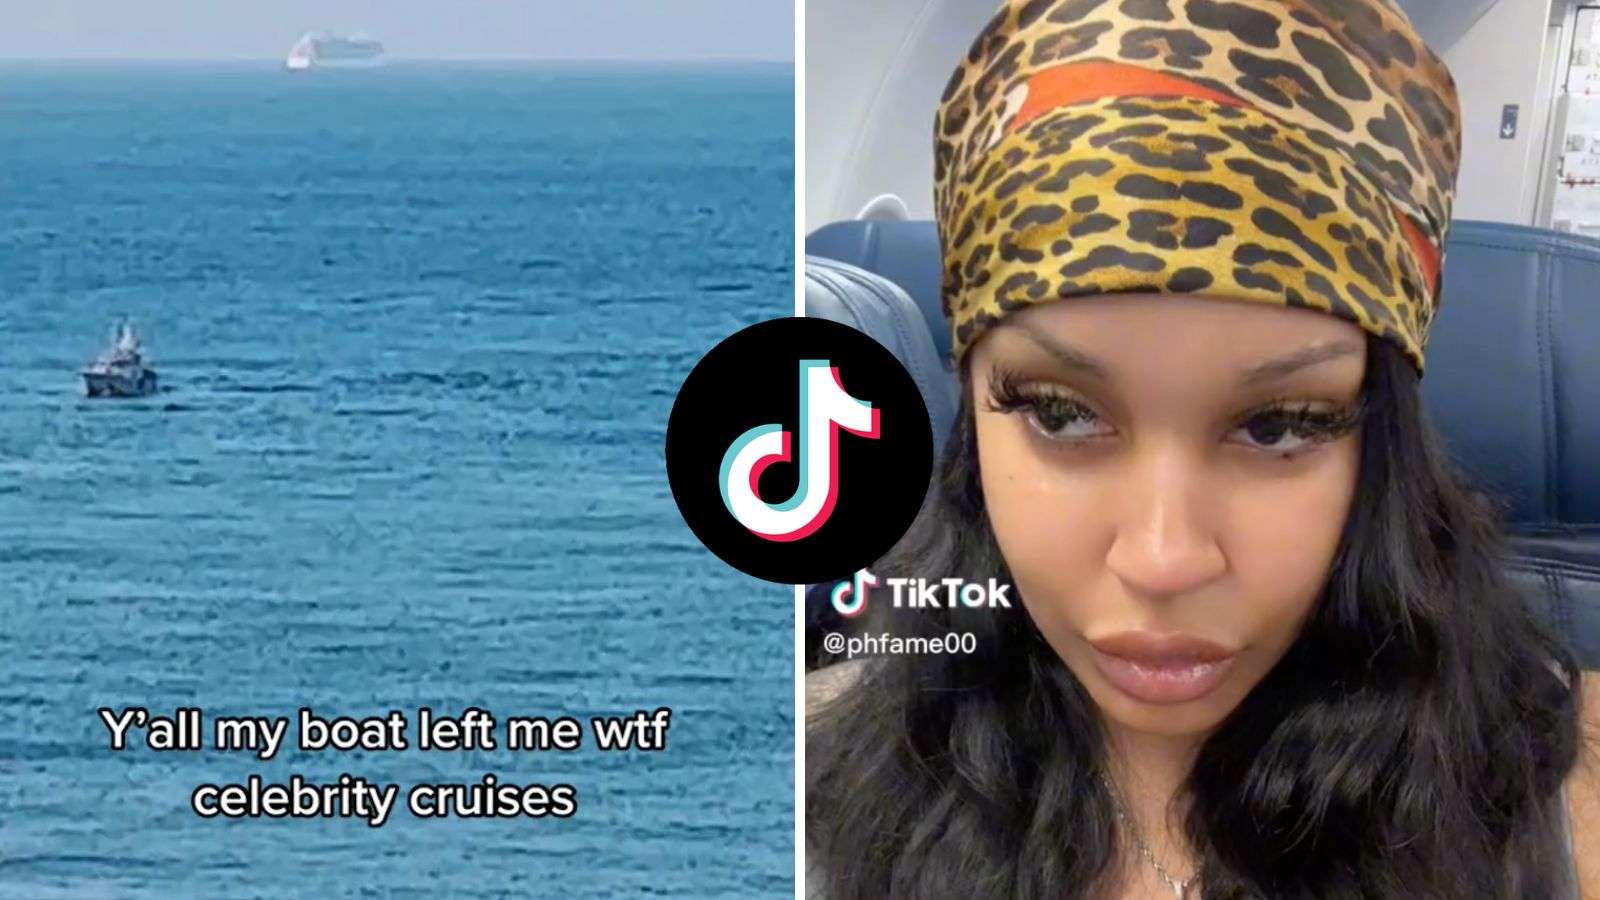 Woman sparks debate after cruise ship left her stranded on island